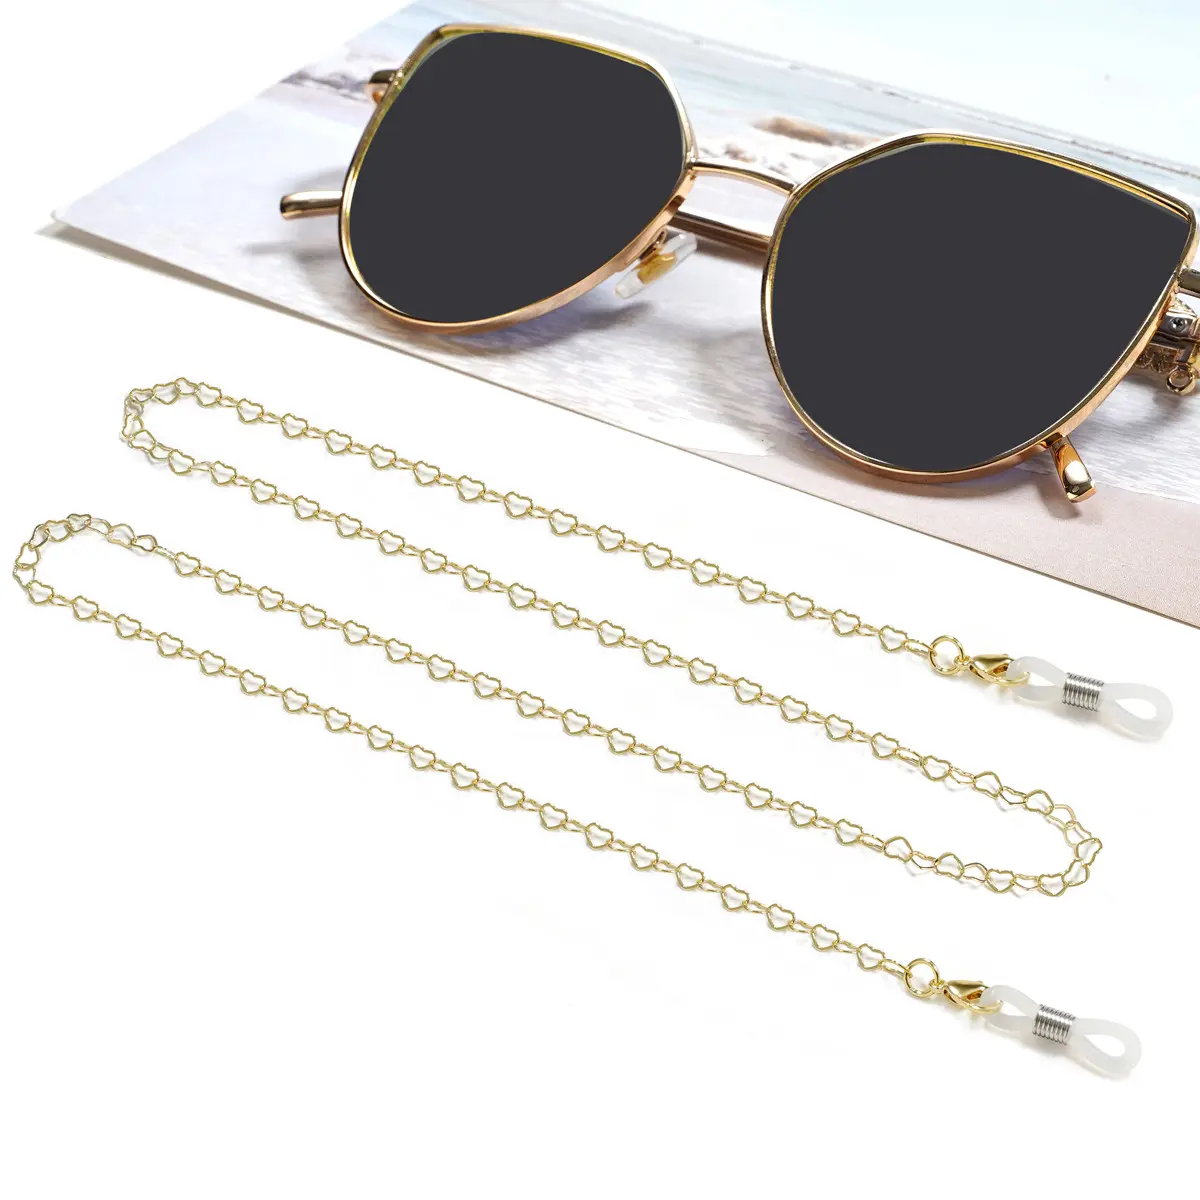 Face Cover Chain Eyeglass Cord Chains Glasses Neck Cord